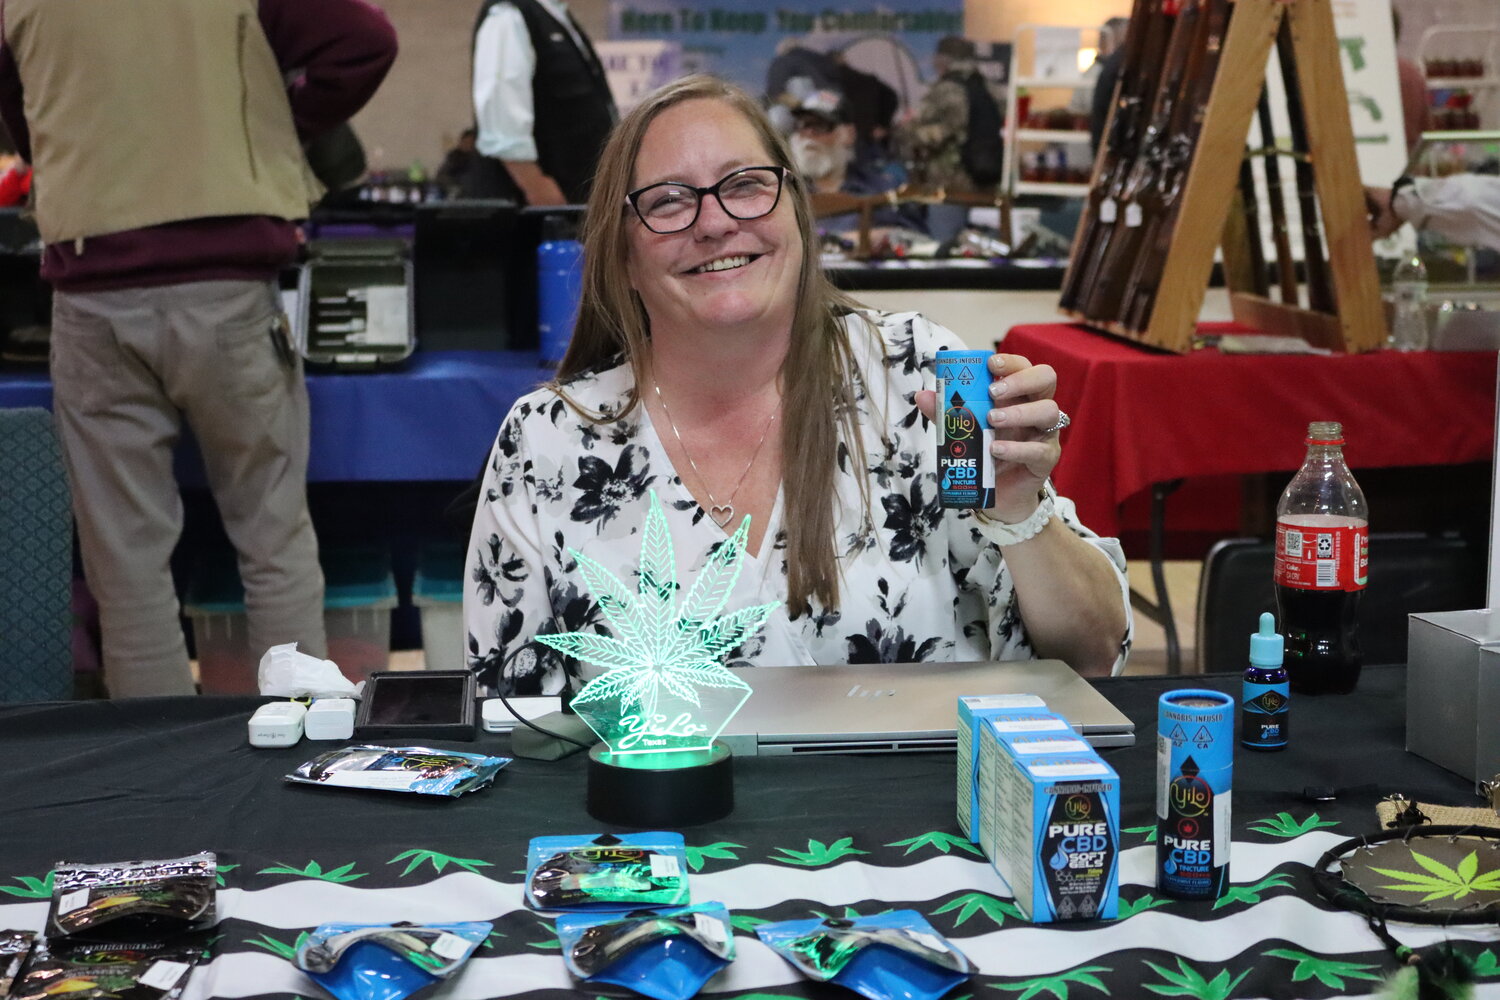 No gun smoke here. LesLey Wiedemann with Yilo CBD was just one of the booths that illustrated the wide range of vendors and items at the Whipp Farm Productions event.